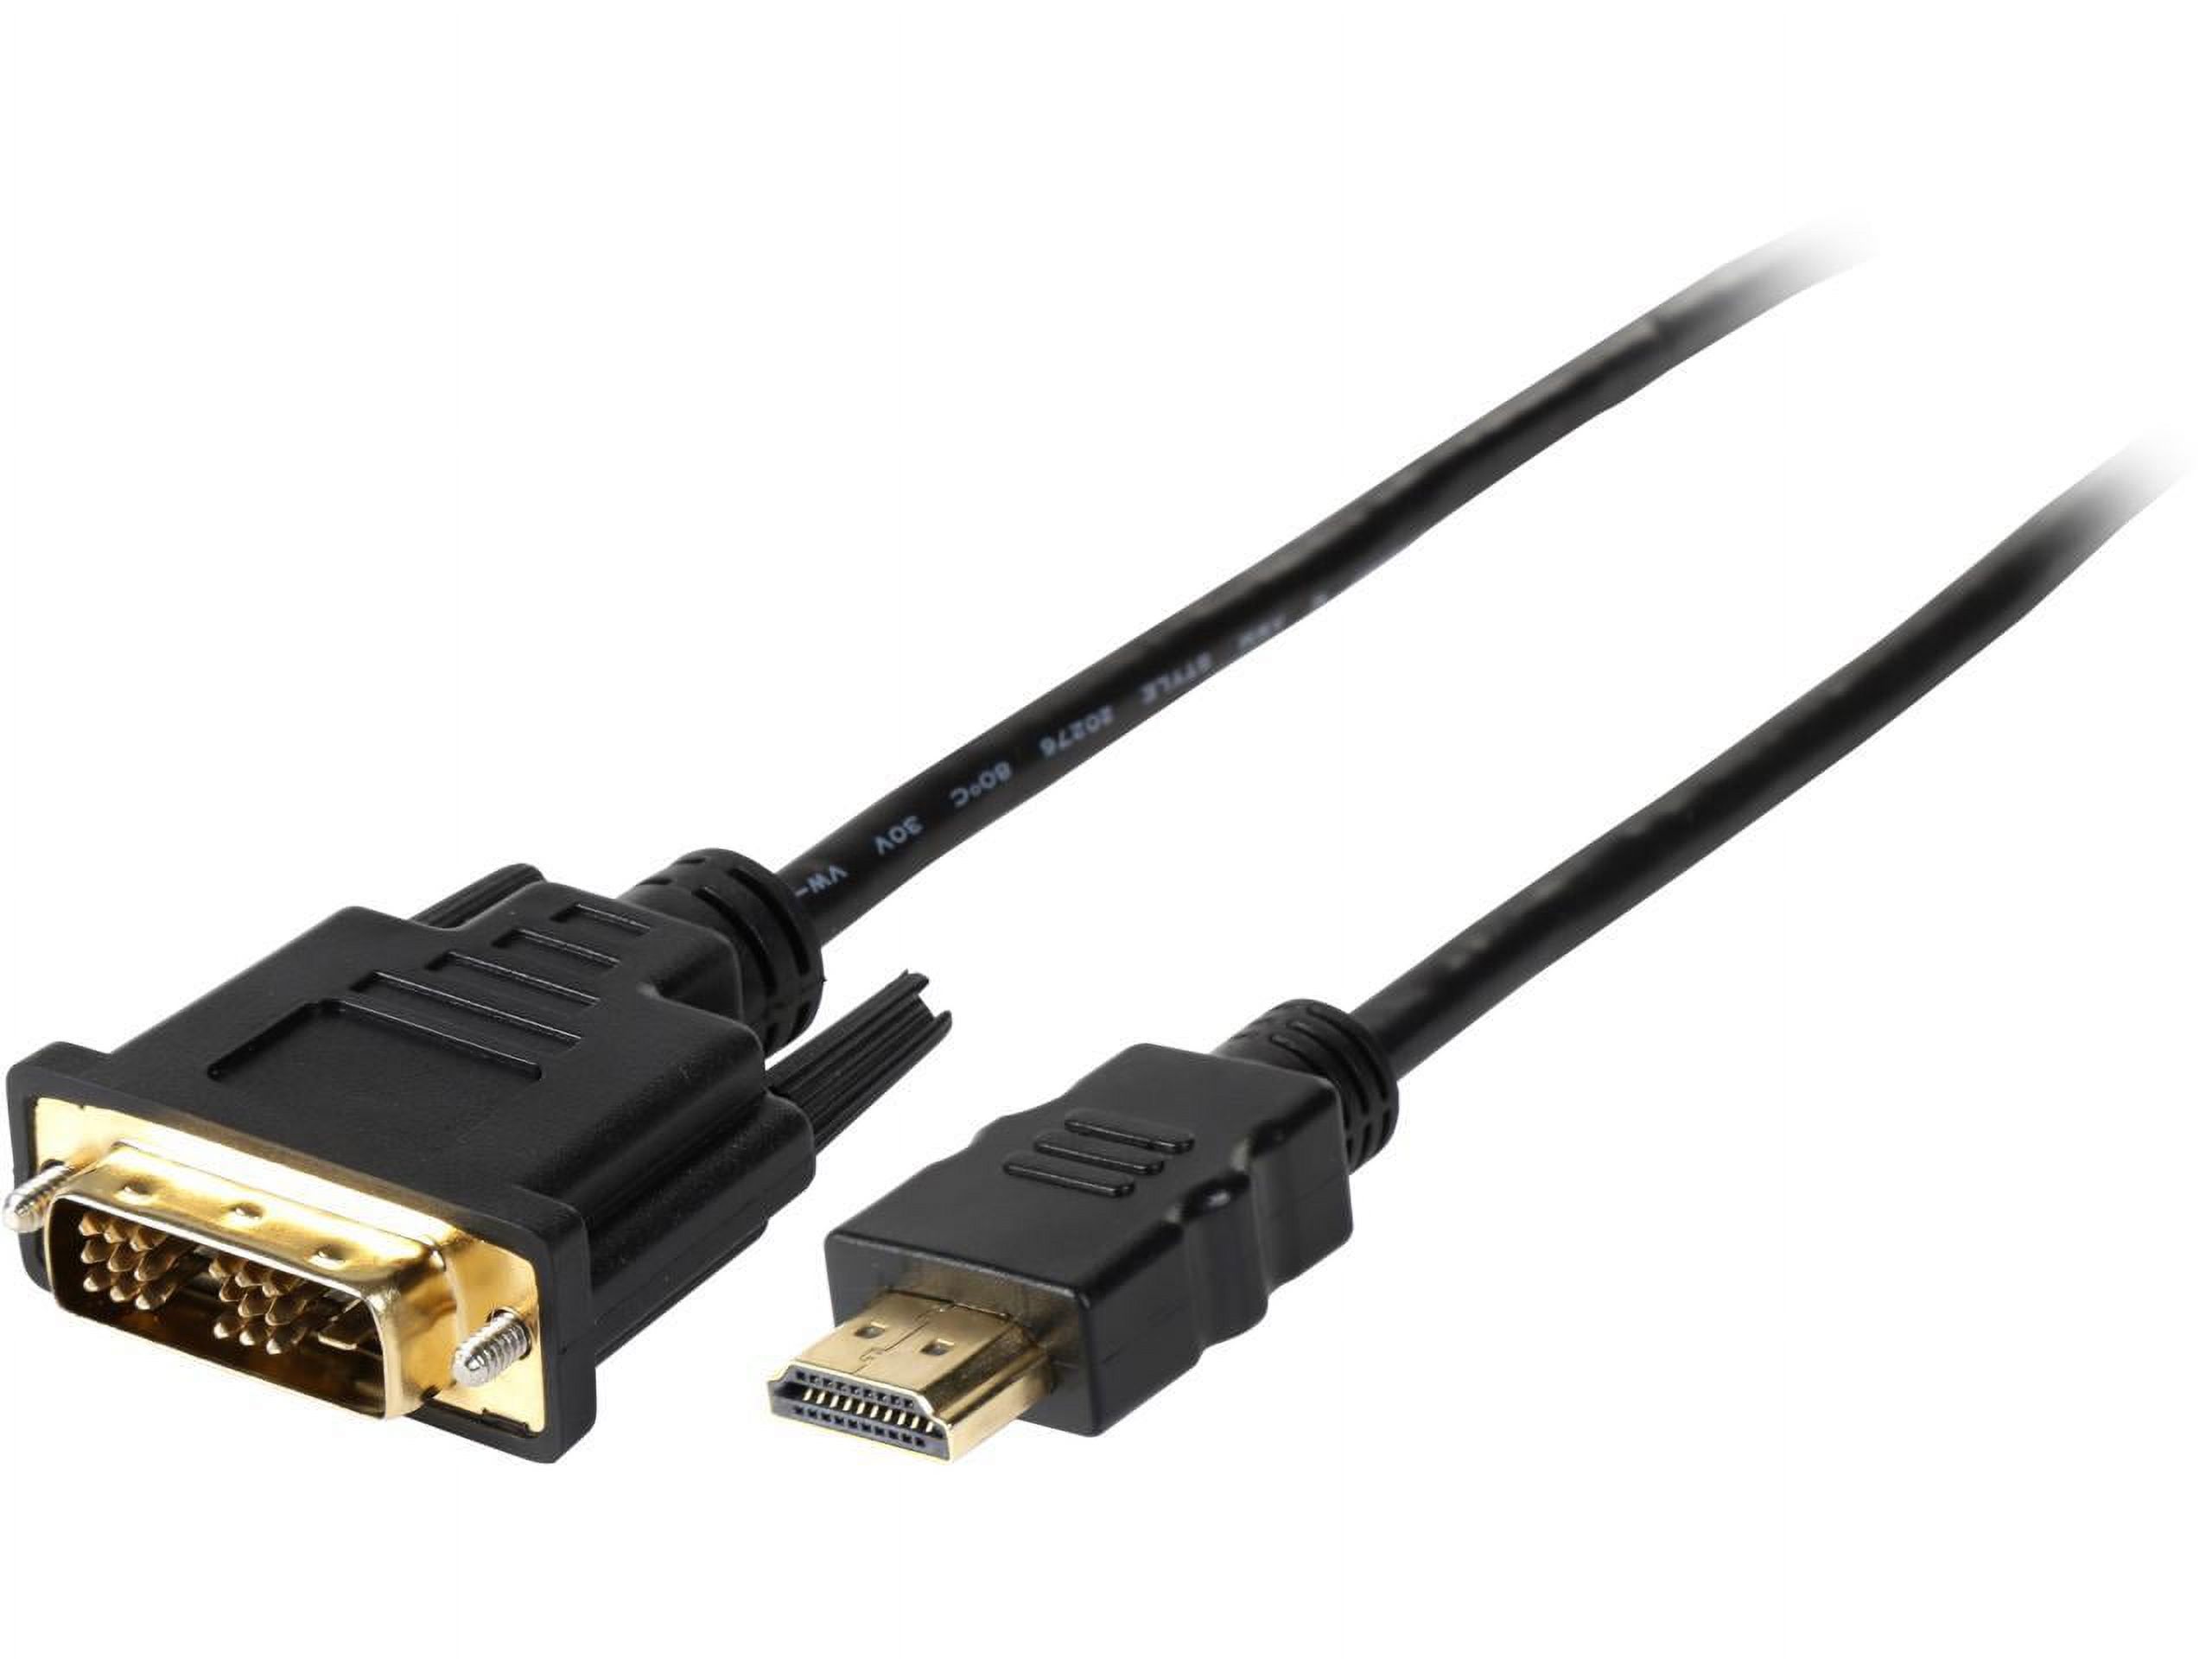 Tripp Lite P566-003 HDMI to DVI Cable, Digital Monitor Adapter Cable (HDMI to DVI D M/M), 1080P, 3 ft. - image 1 of 3